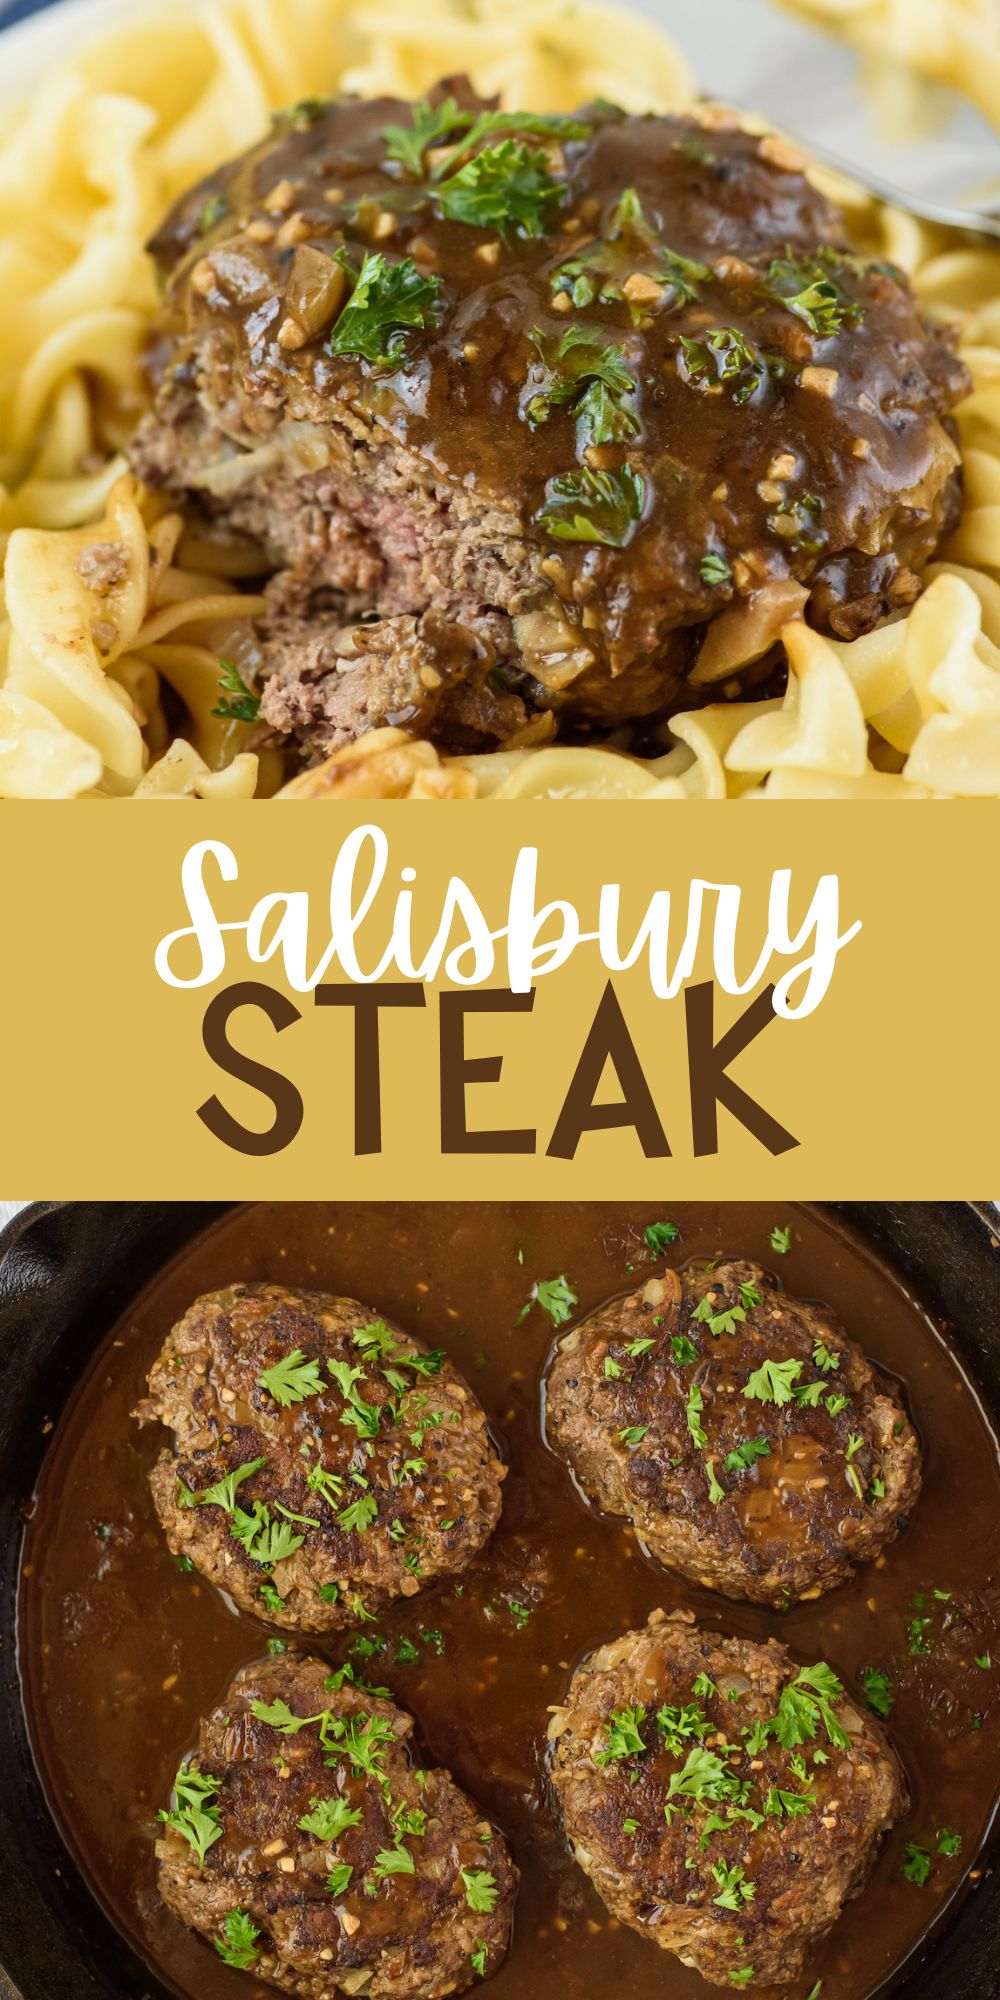 two photos of steak on top of pasta and covered in sauce with words on the image.